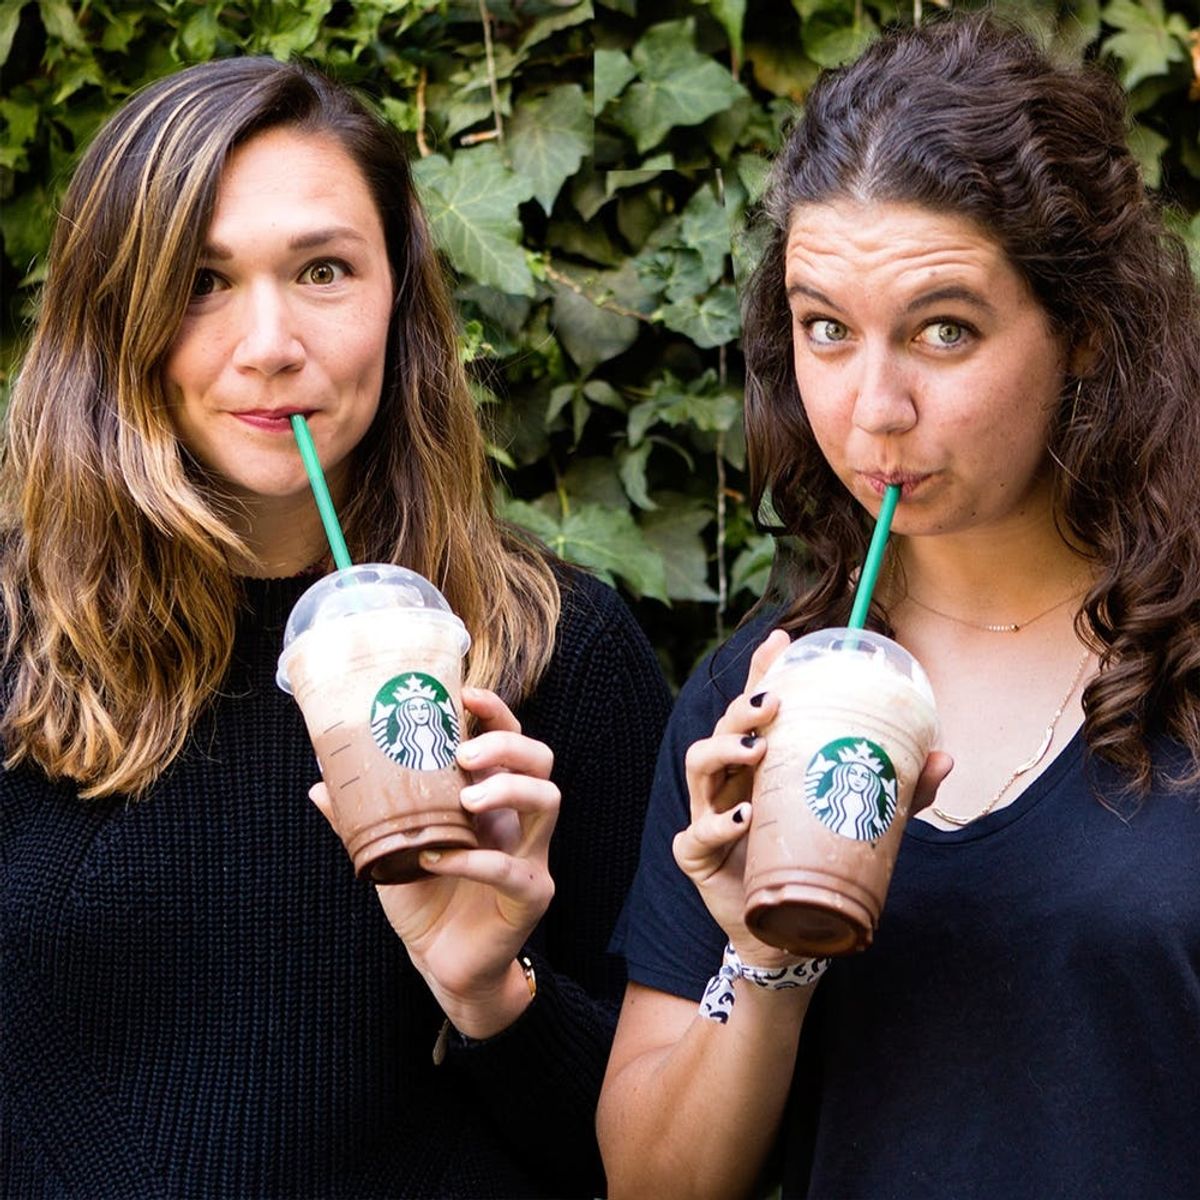 What Happened When a Sugar Addict and a Coffee Minimalist Tried Starbucks’ New Double Fudge Frappuccino